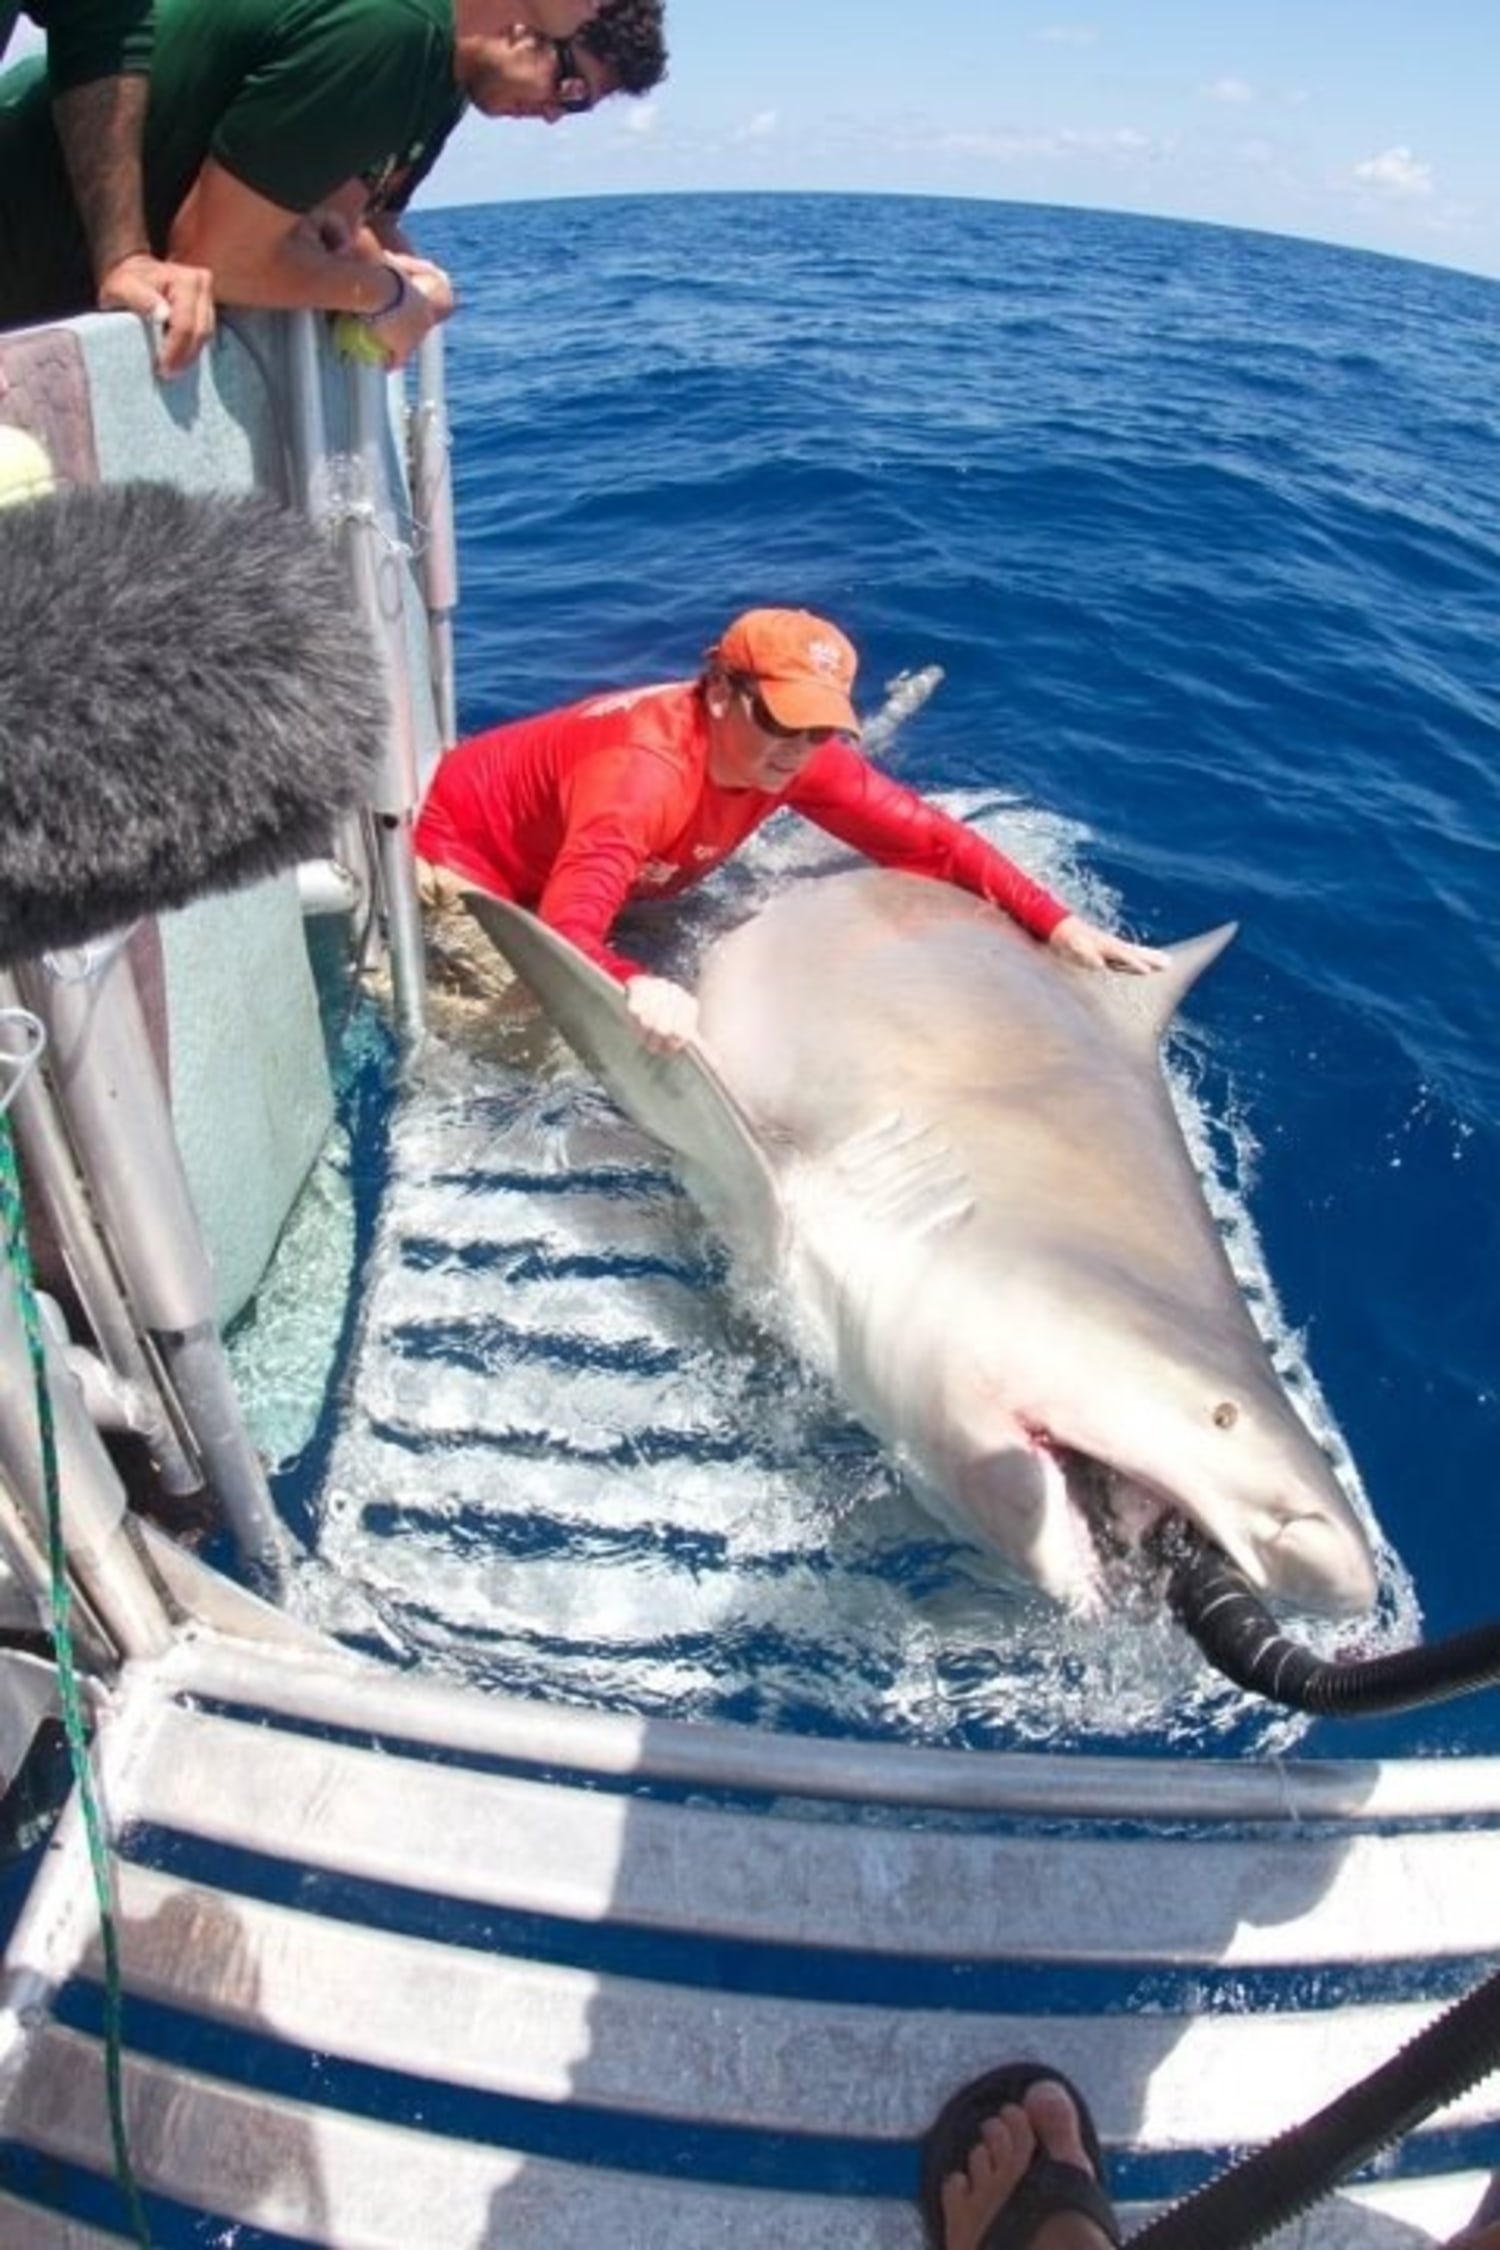 What a catch: Giant bull shark surprises researchers